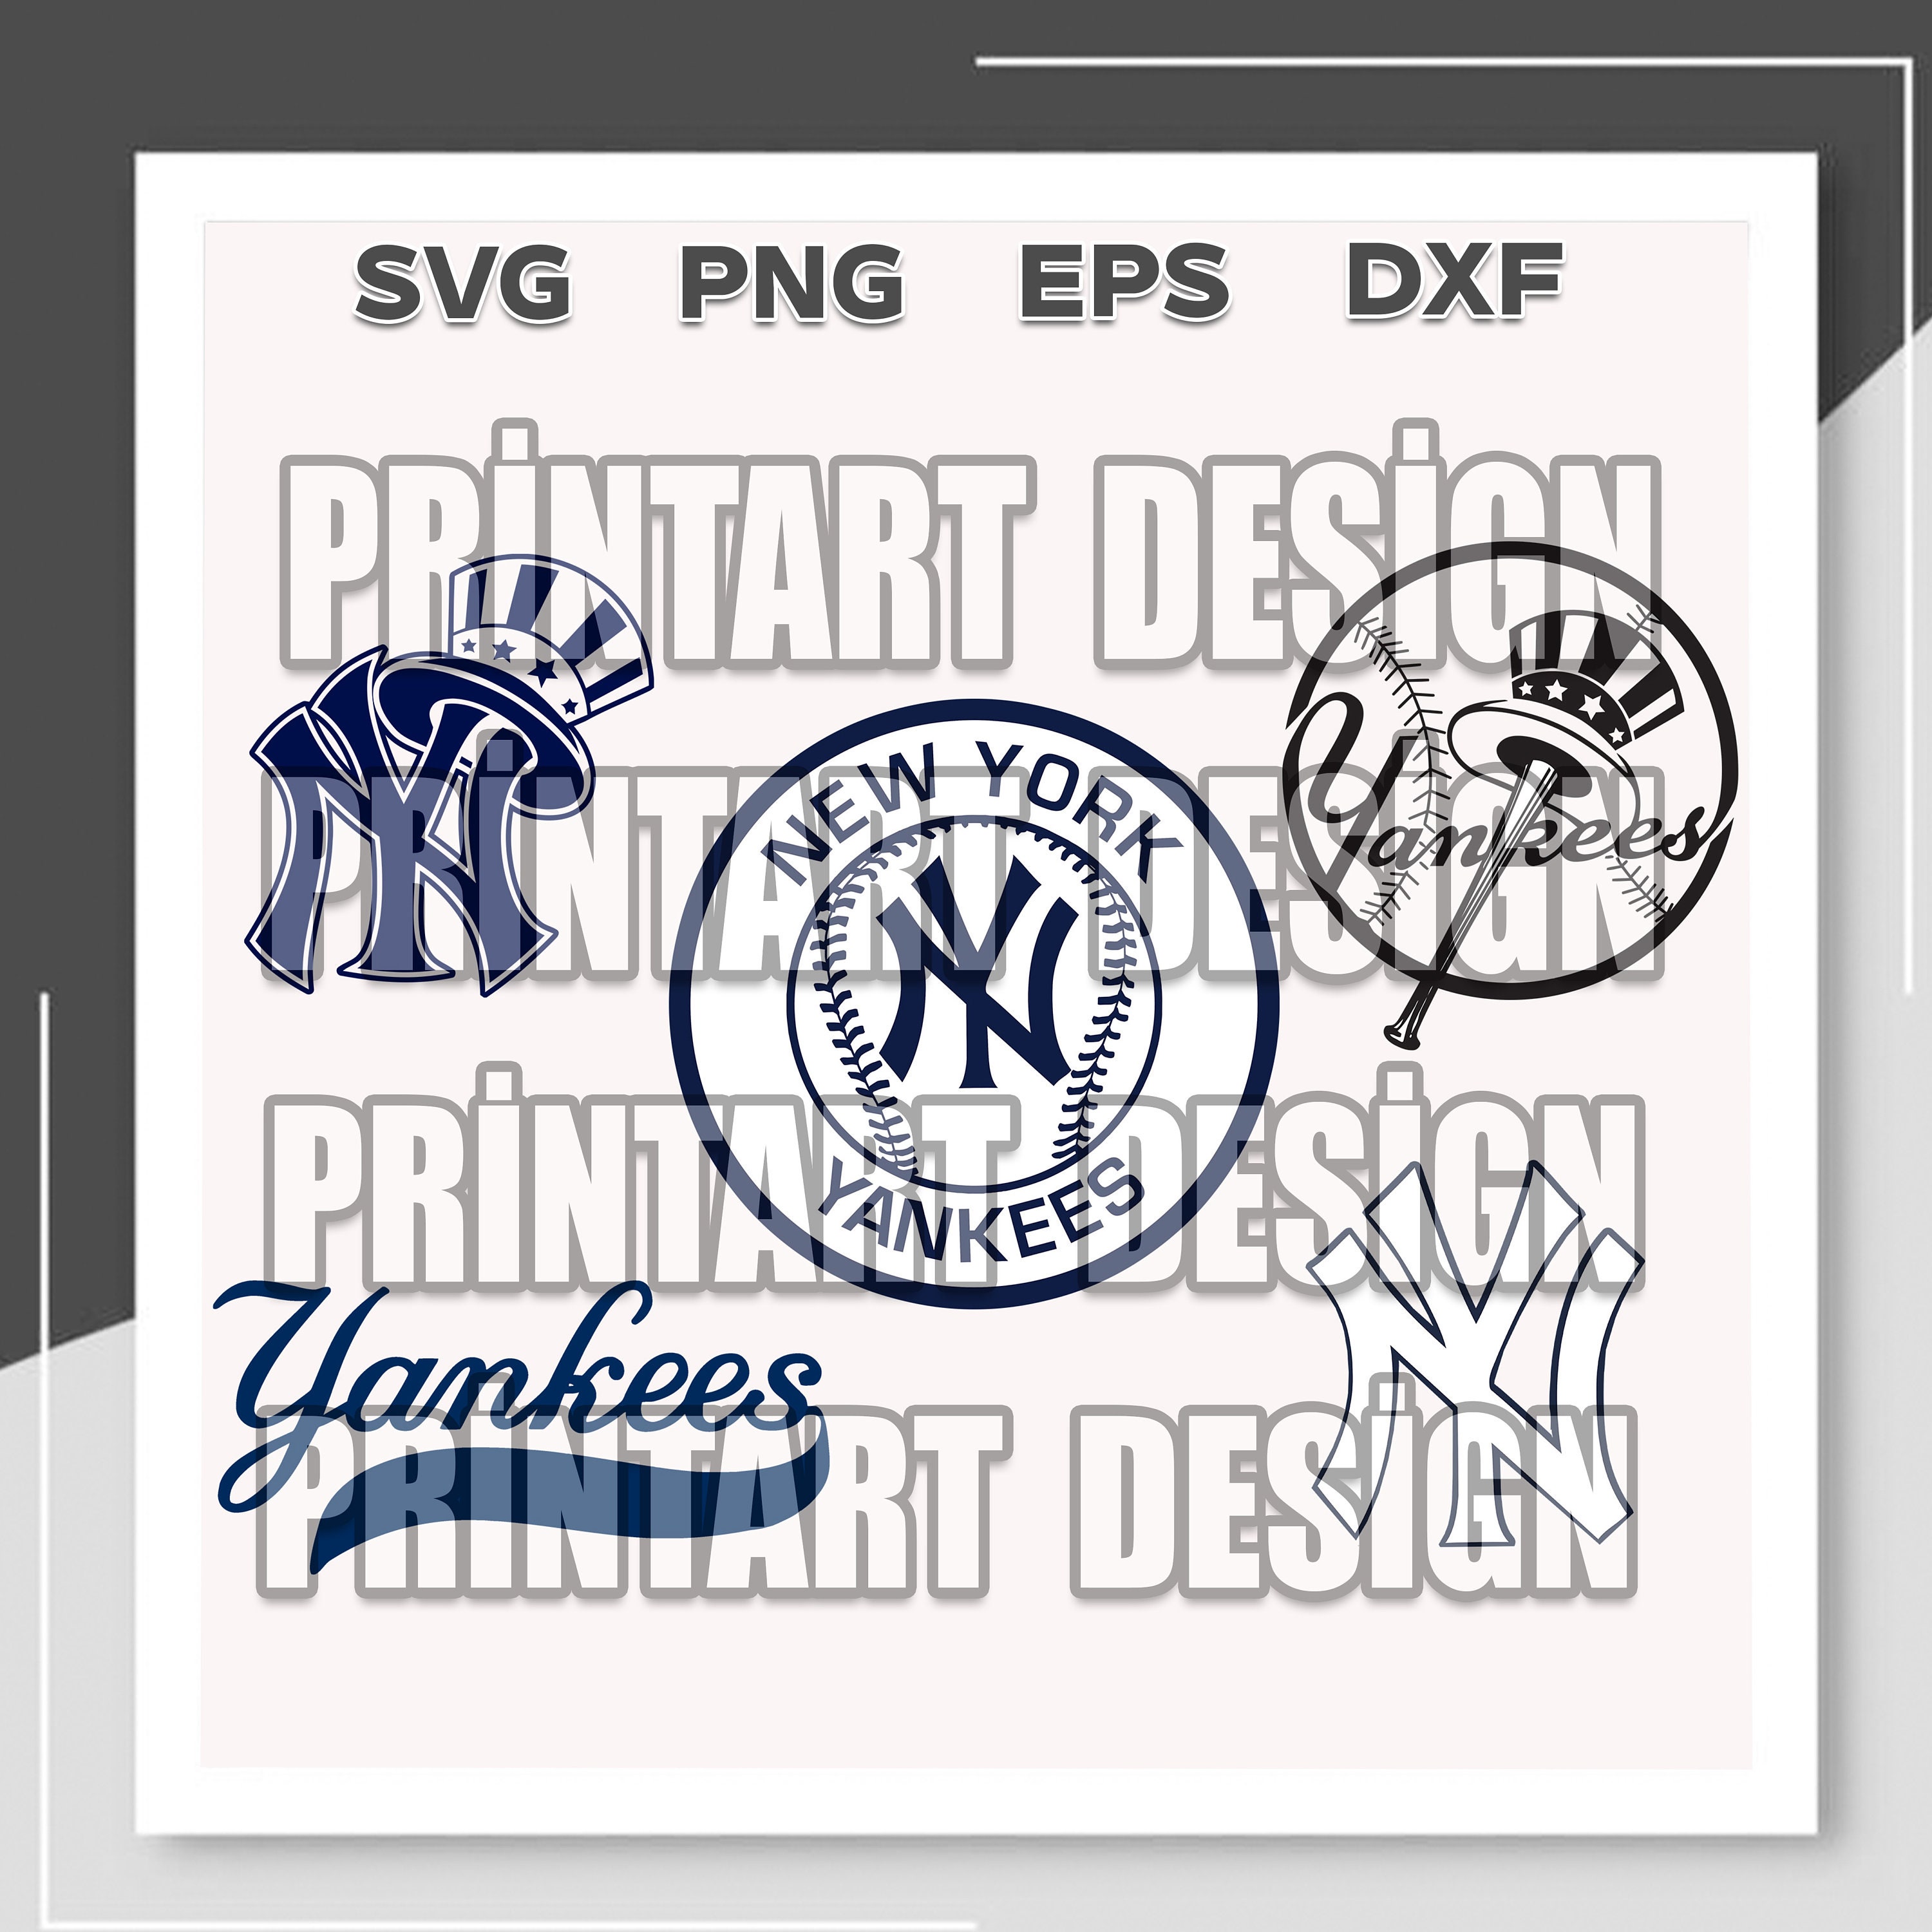 Printable DIY Mickey Mouse New York Yankees baseball Iron on transfer  digital image clipart INSTANT DOWNLOAD